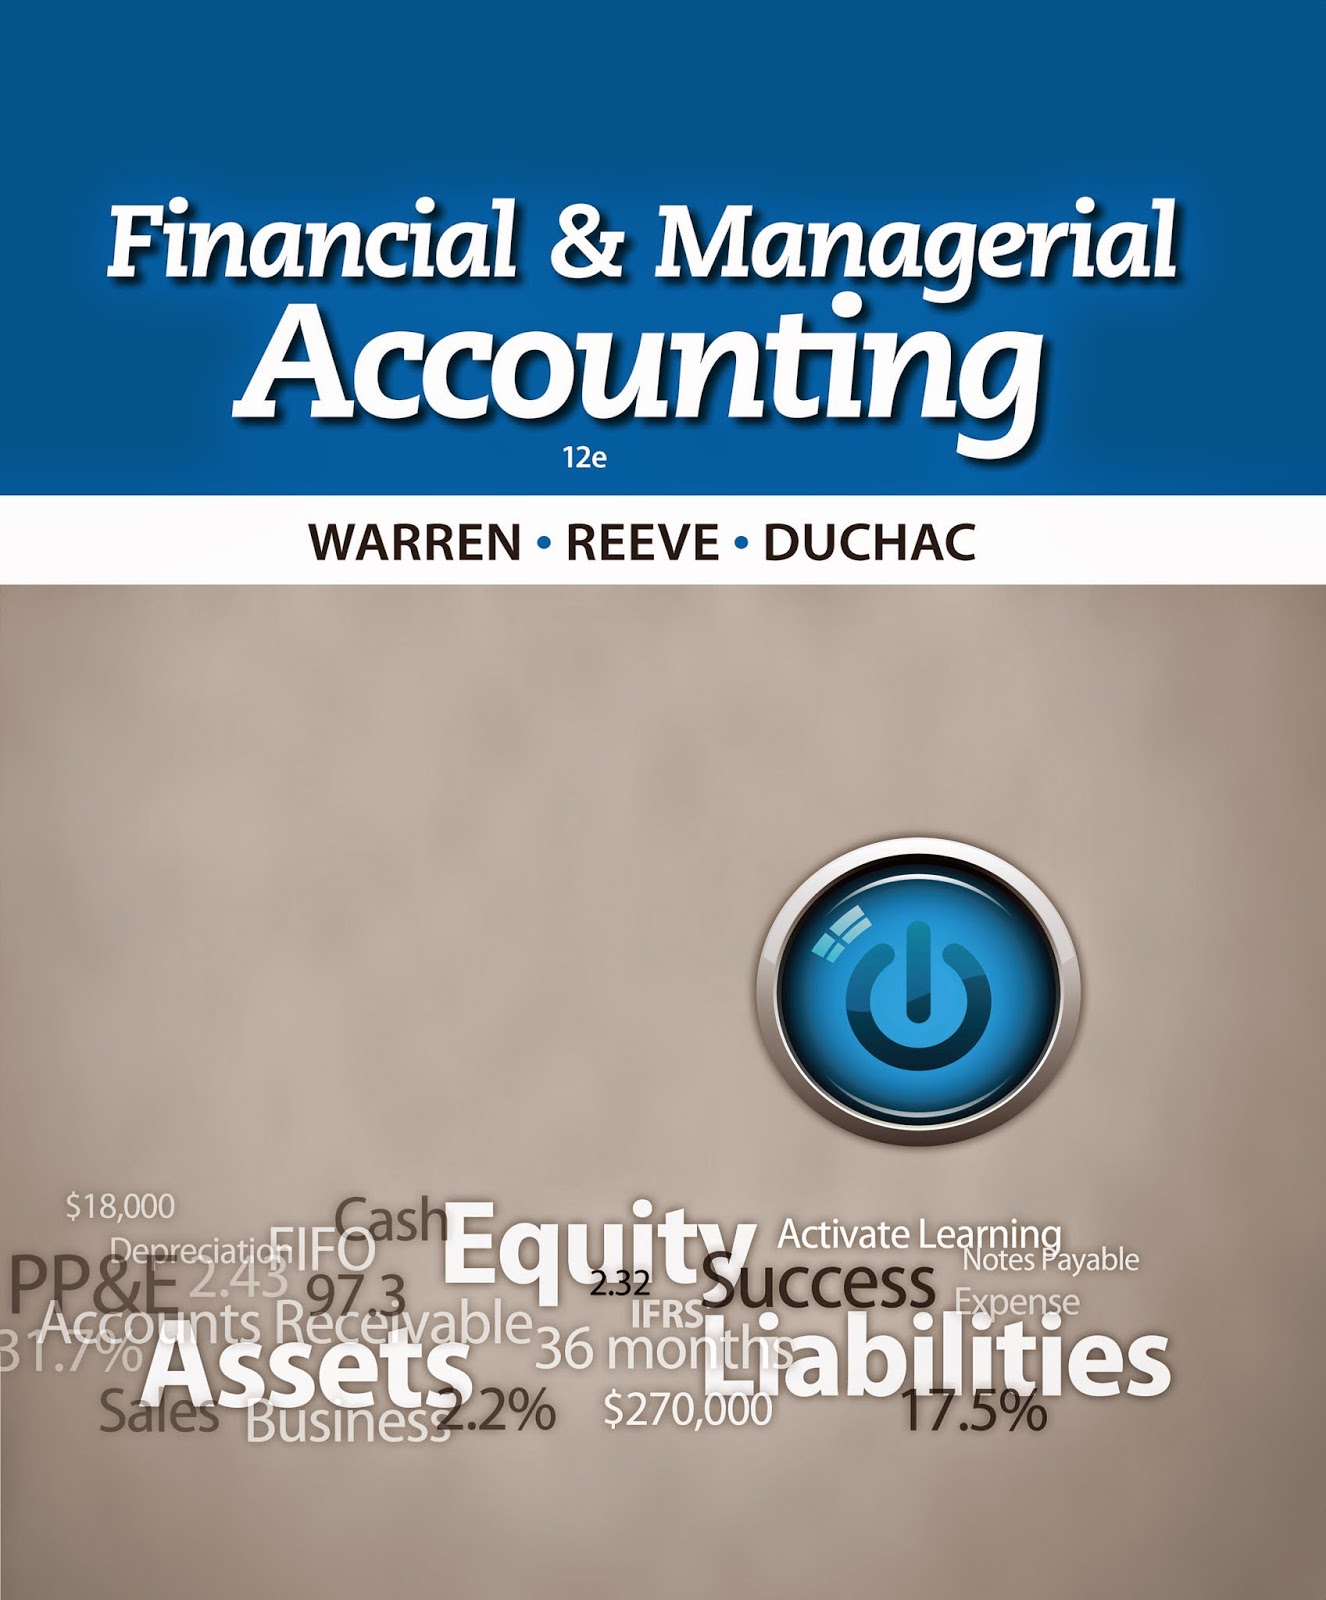 http://www.kingcheapebooks.com/2014/07/financial-managerial-accounting.html